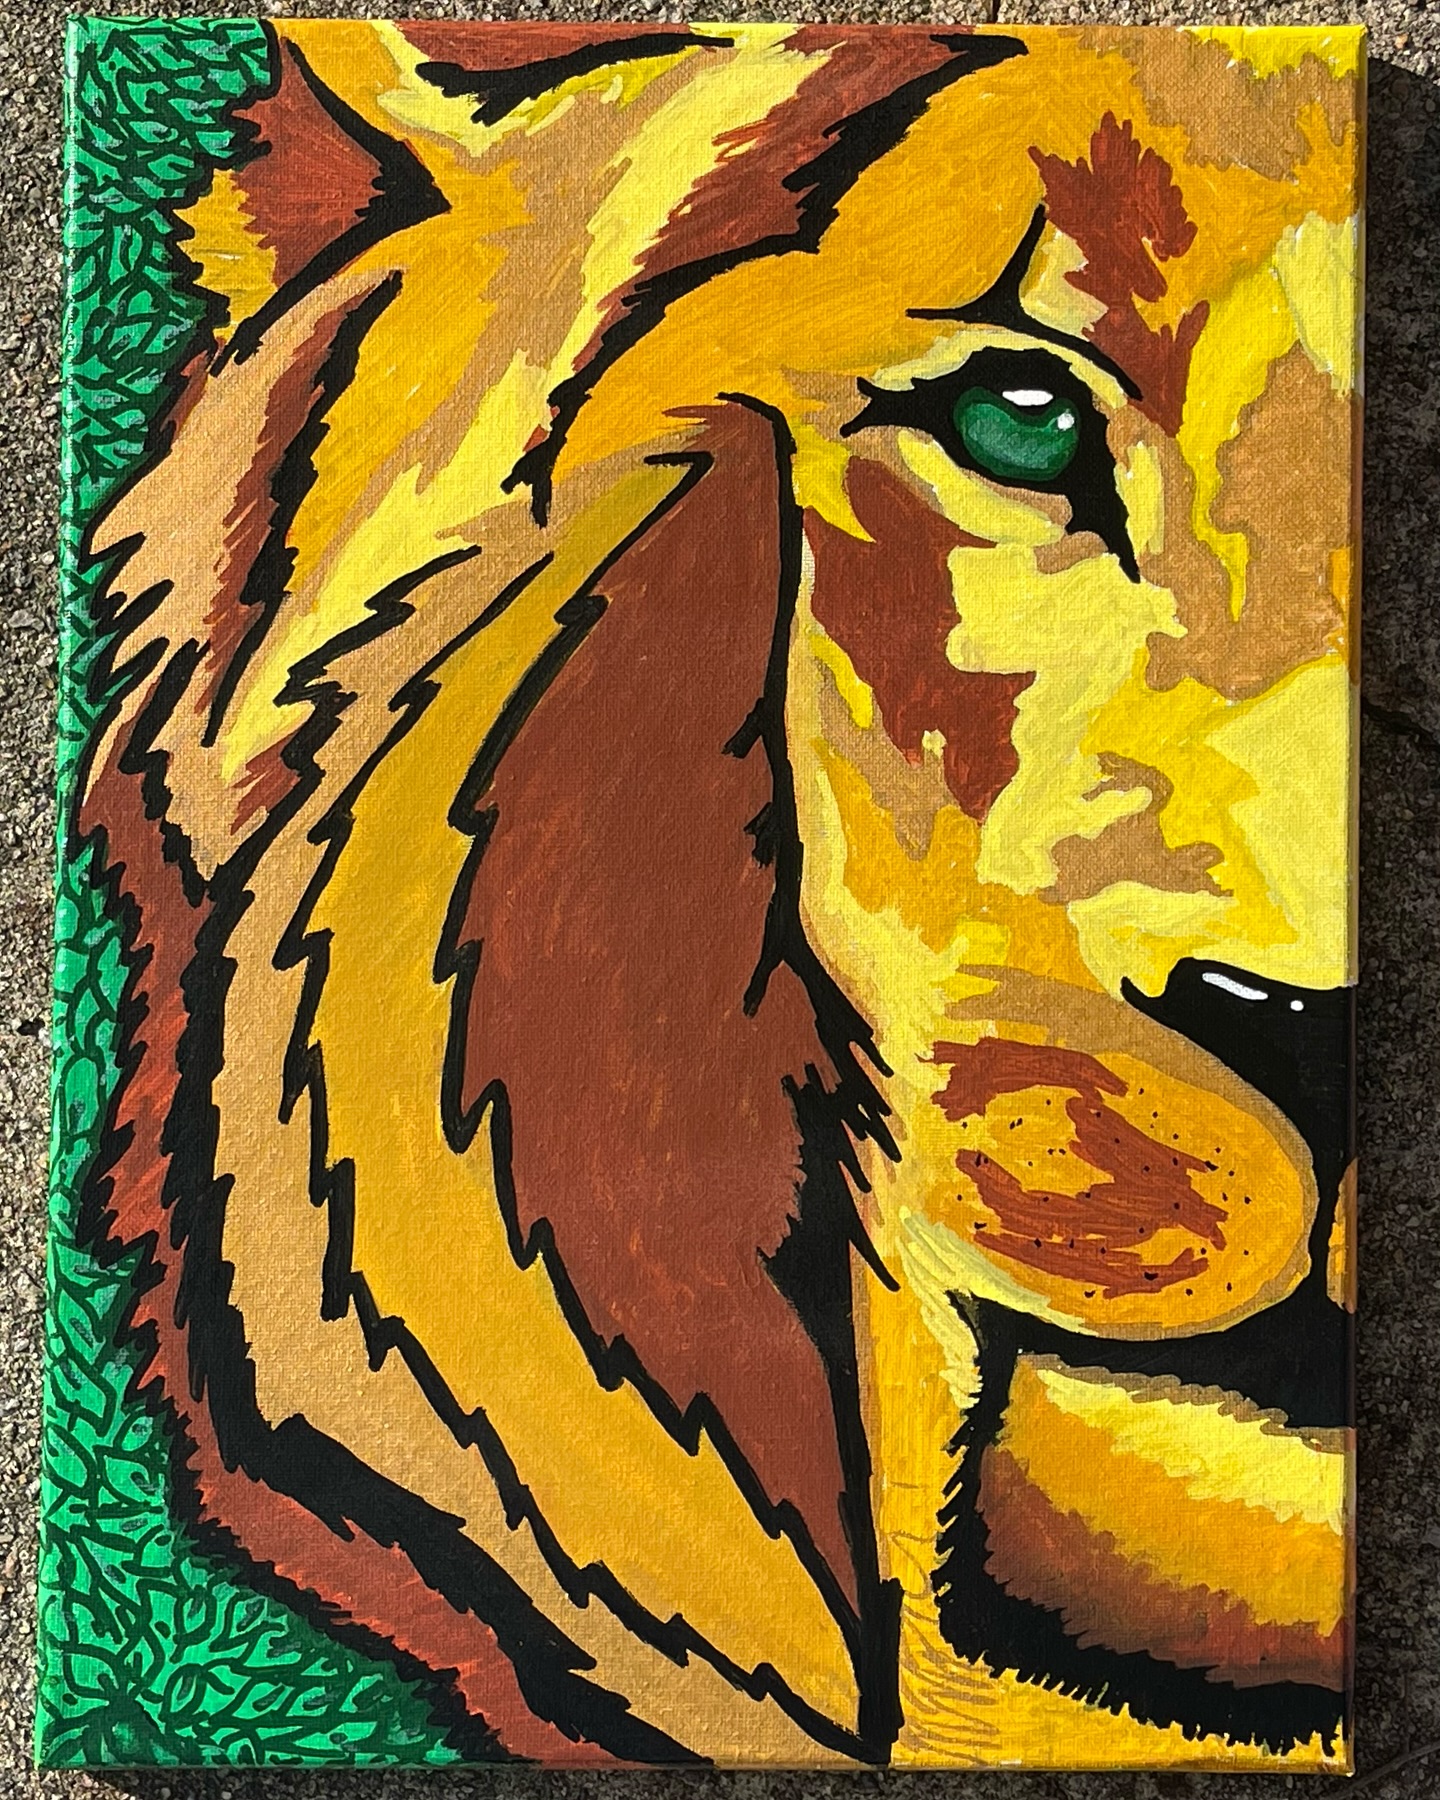 🦁 Rawrrrrr 🦁

New Commision Piece!! 
SOLD $100  Acrylic Canvas 12x16

Please Comment or DM me for a custom piece !!!! 

#buymyart #acrylic #buyart #art #buyme #follow #joinme #followme #subscribe ##artist #art #painting #supportsmallbusiness #supportanartist